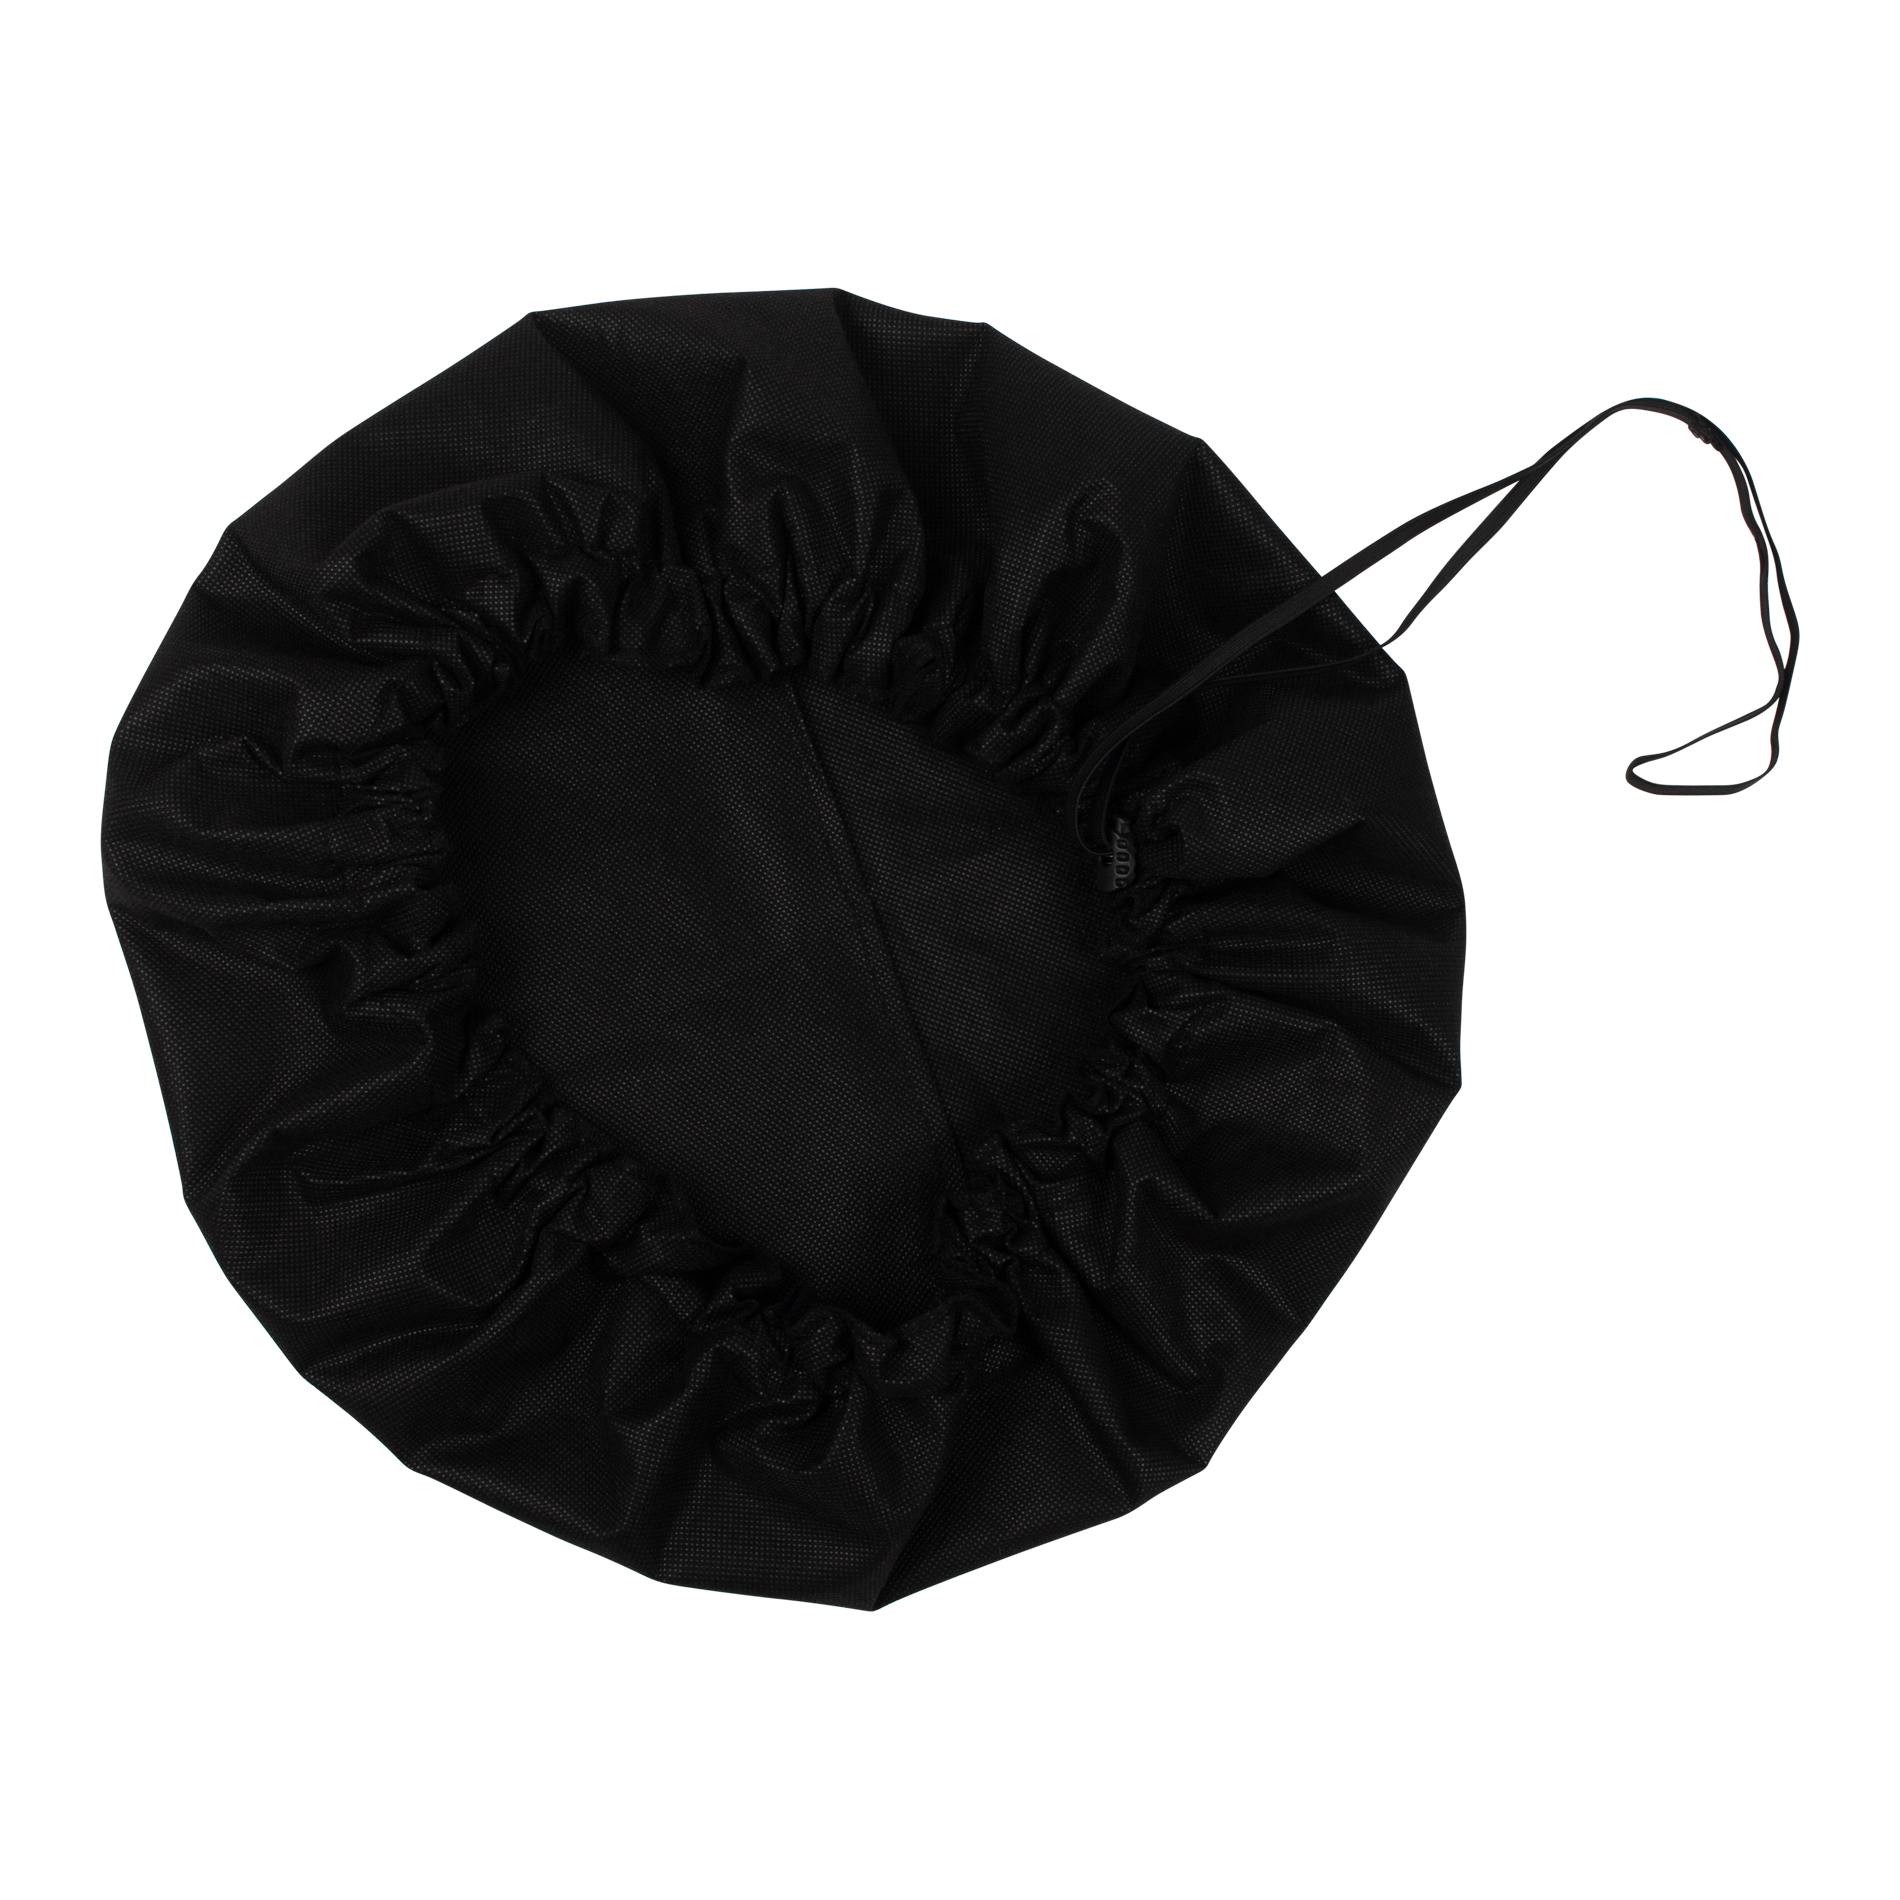 Black Bell Cover with MERV 13 filter, 20-21 Inches-GBELLCVR2021BK